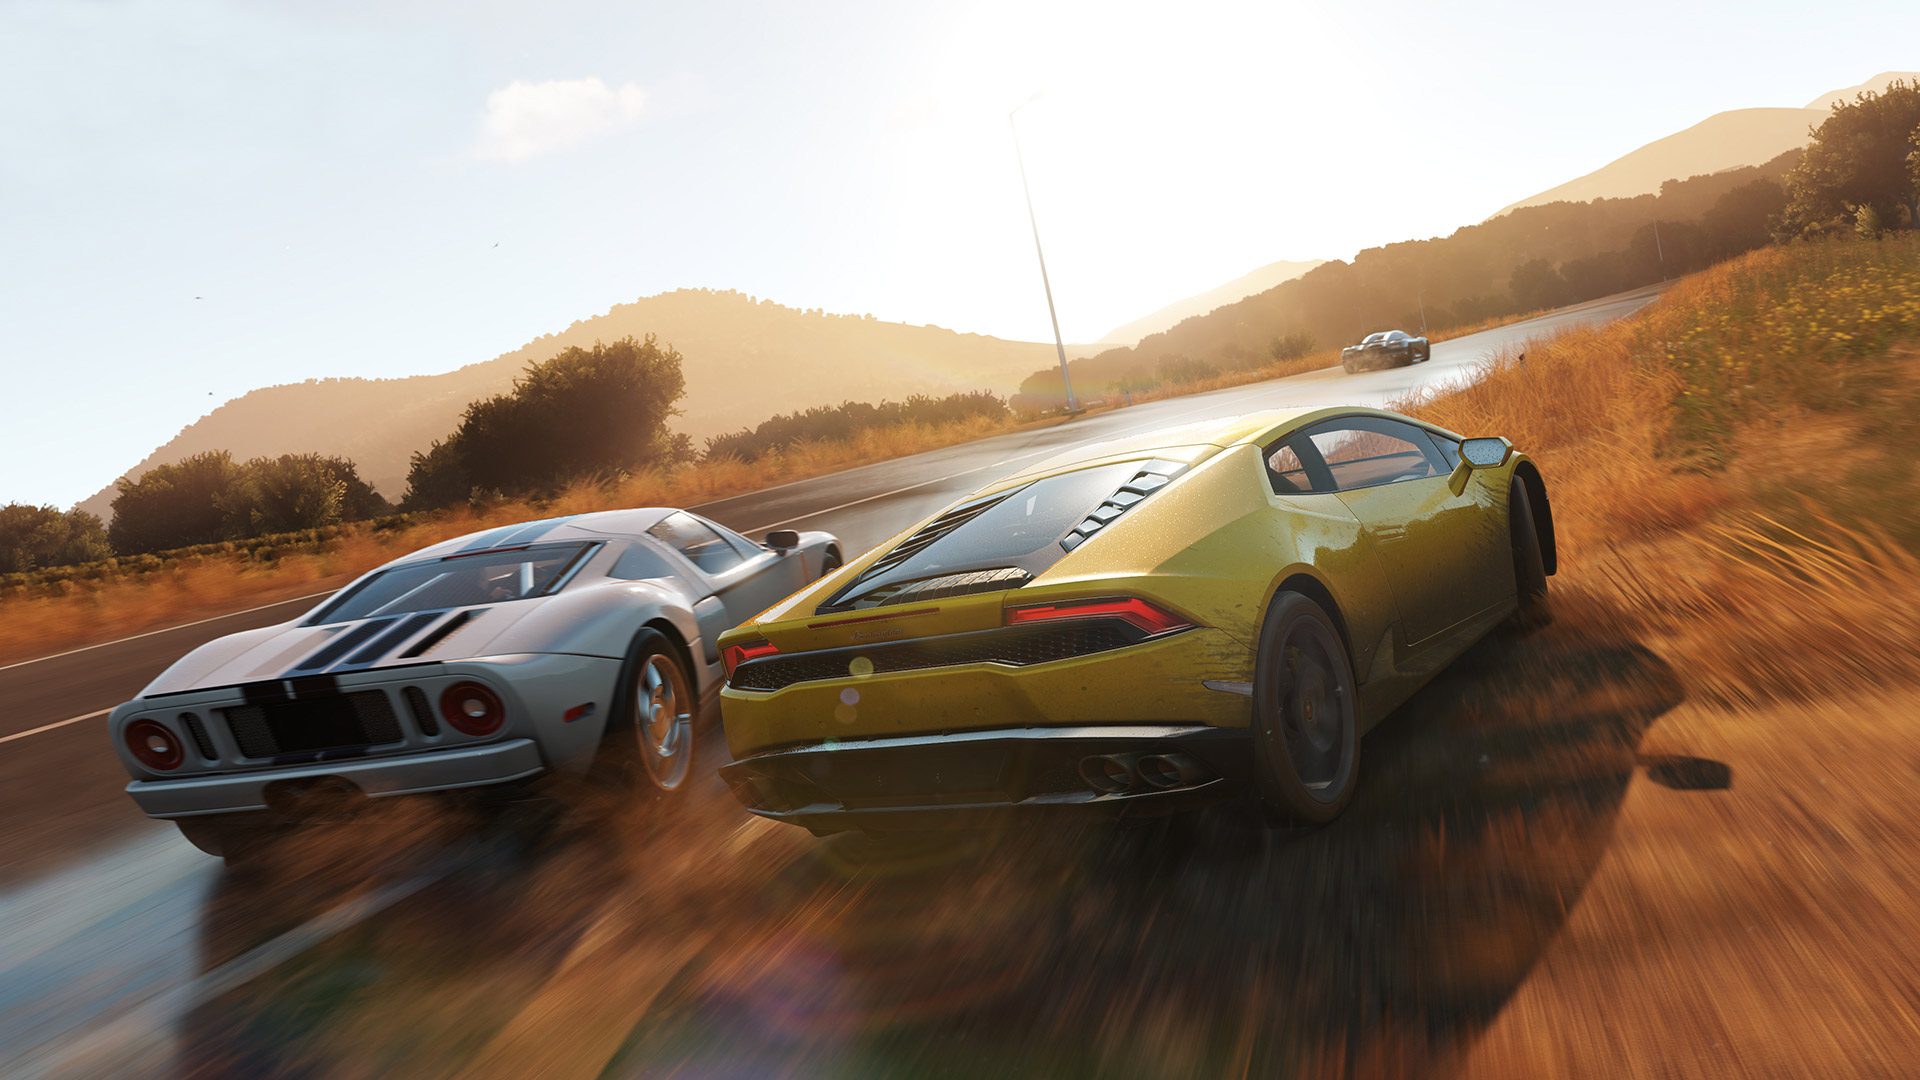 forza horizon 3 system requirements